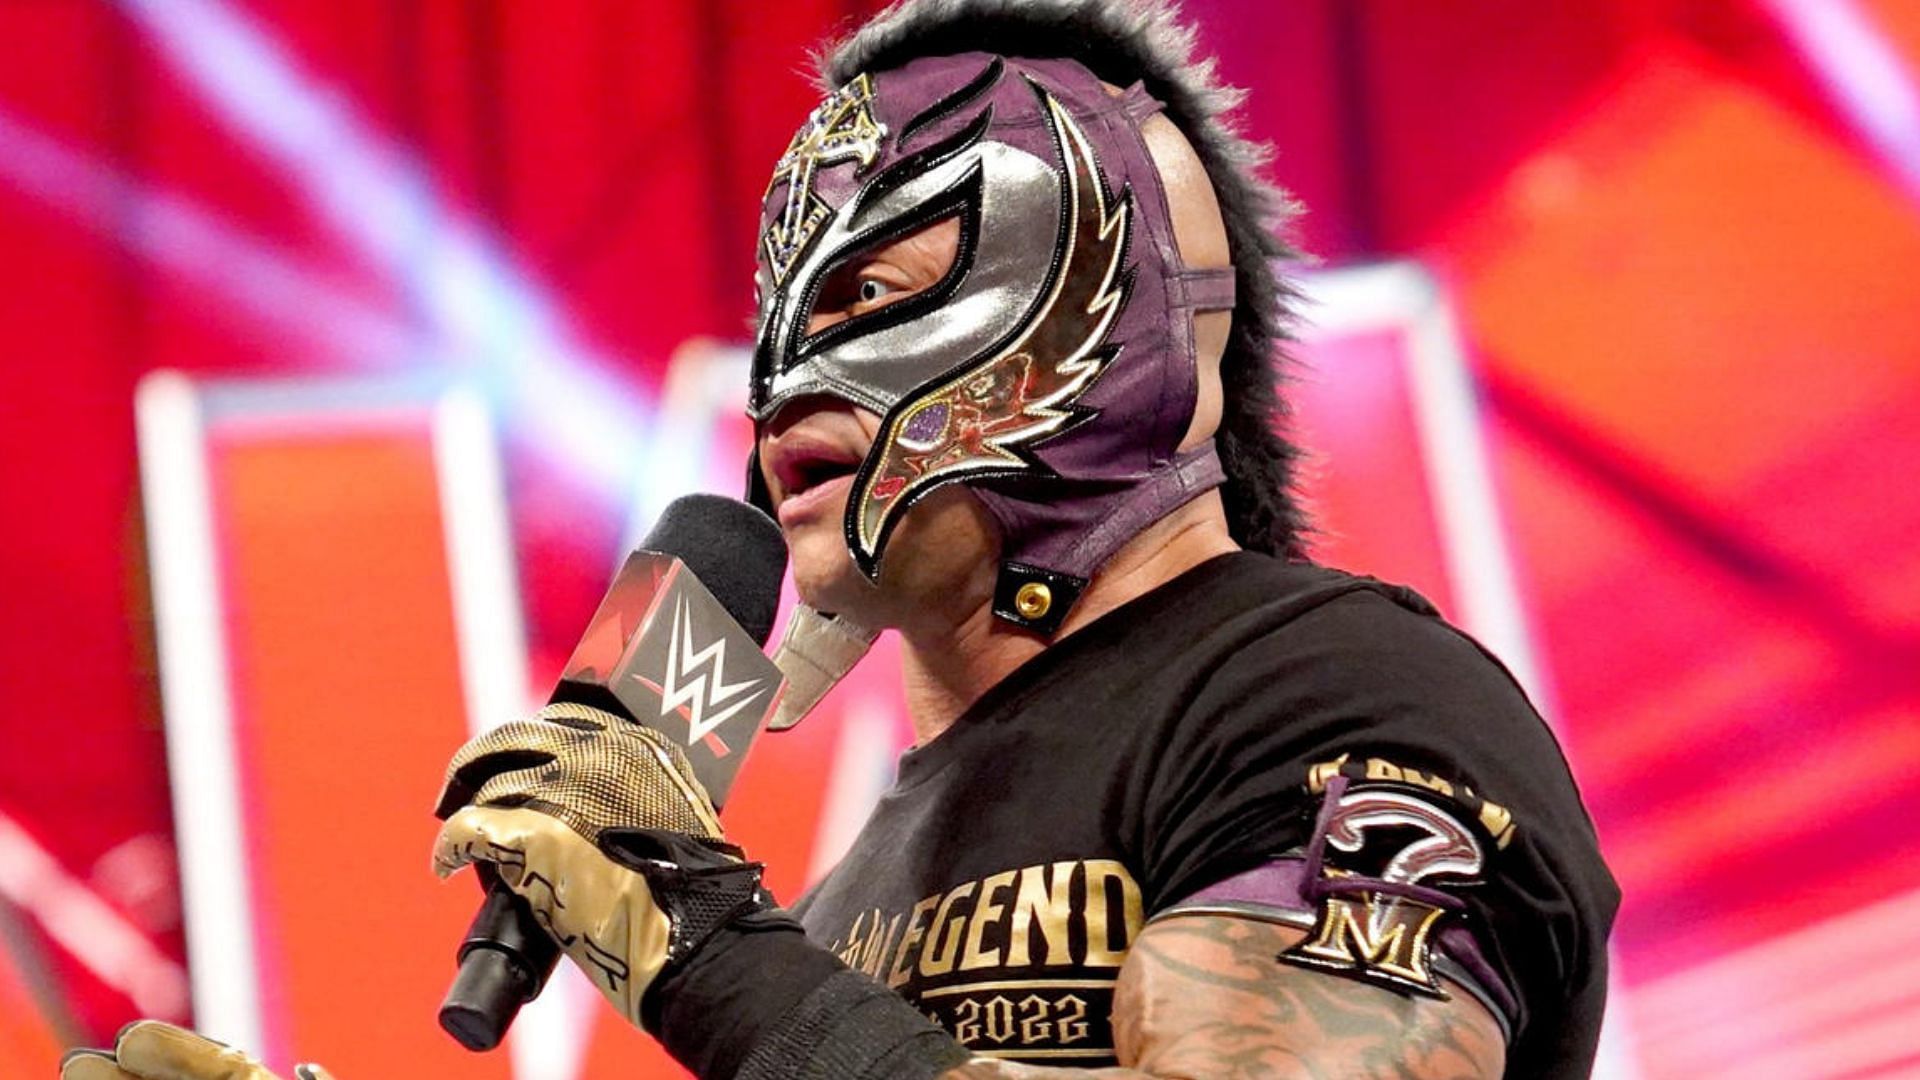 WWE Superstar Rey Mysterio delivering a promo on RAW